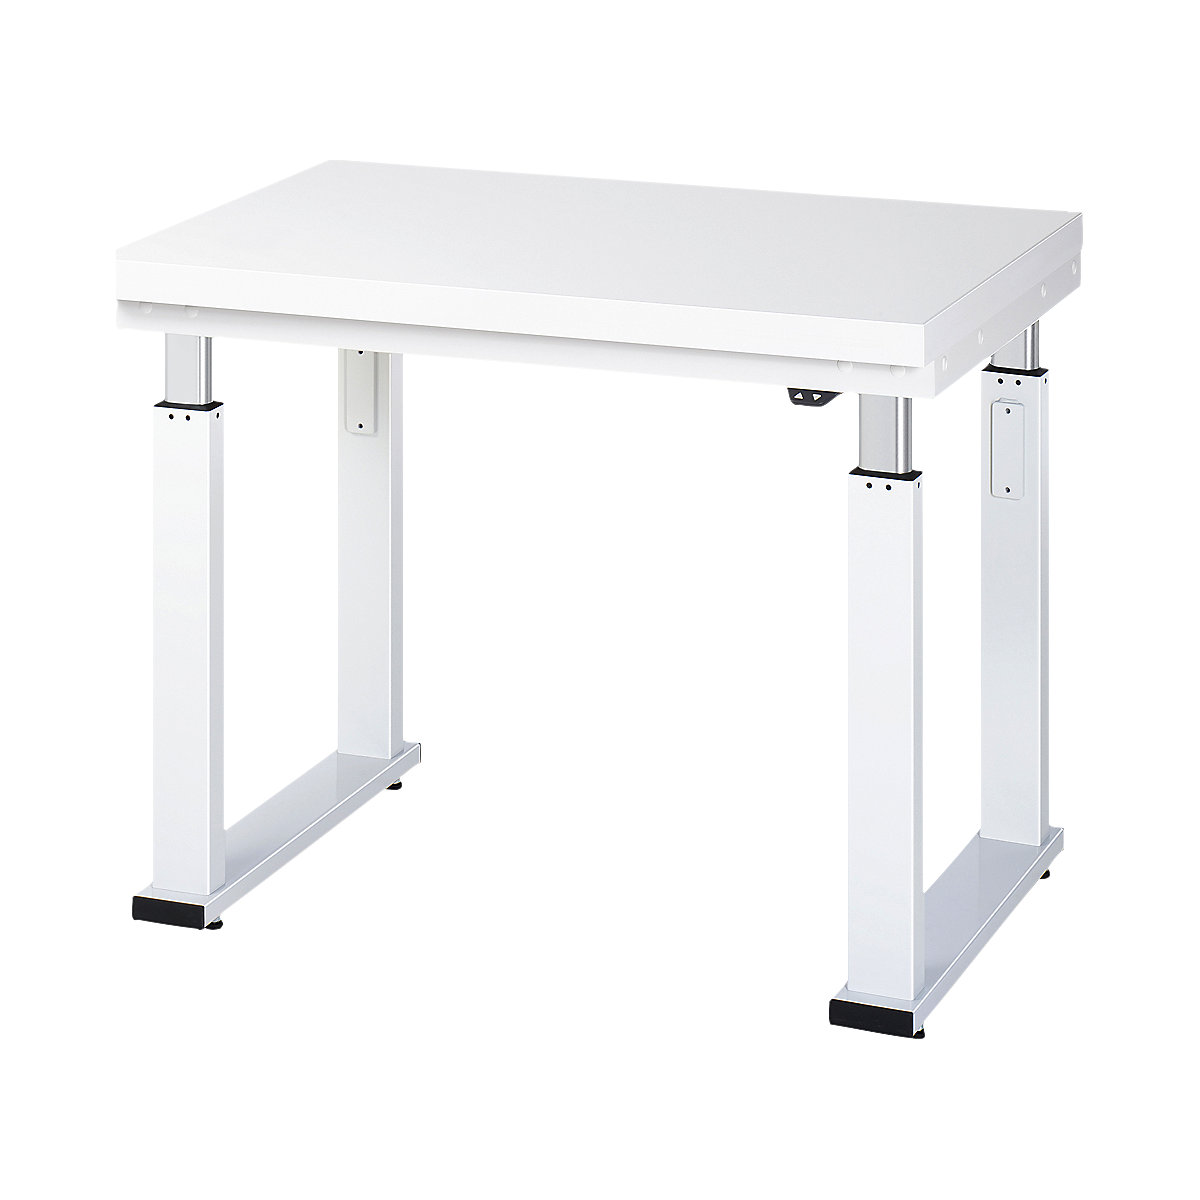 Work table, electric height adjustment – RAU, hardened laminate worktop, max. load 600 kg, WxD 1000 x 700 mm-14